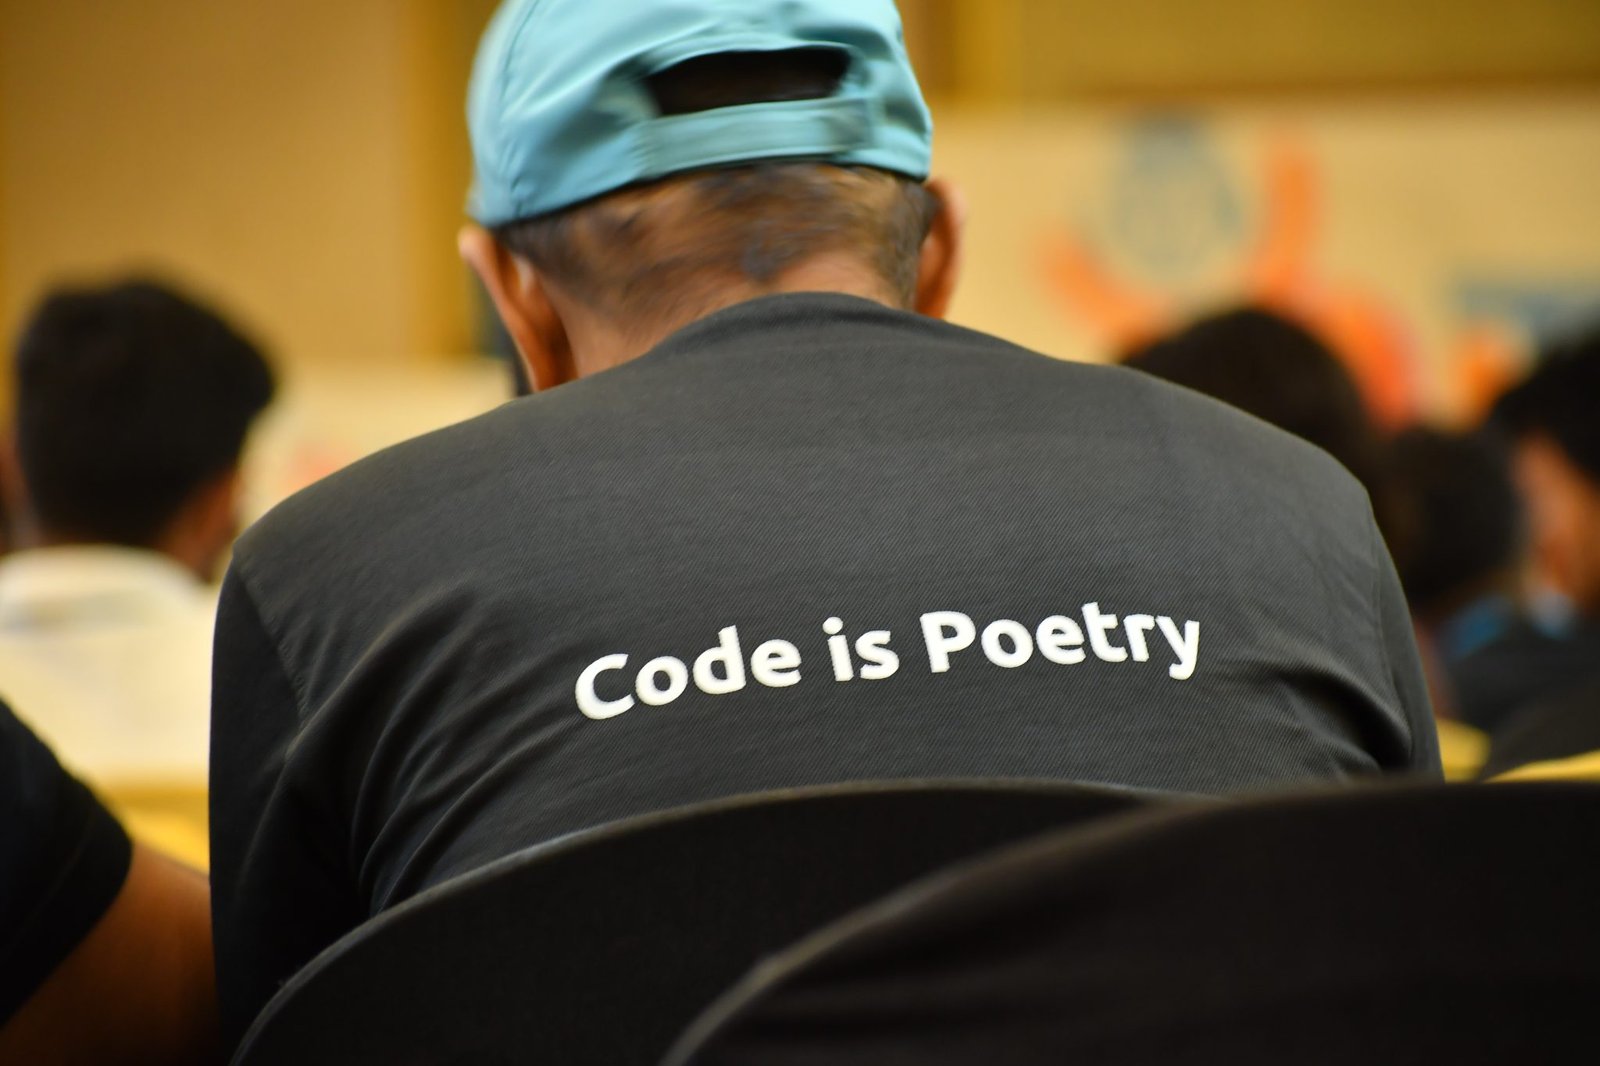 Photo taken from WordPress Youth camp – Wearing T-shirt with WordPress tagline “Code is Poetry”